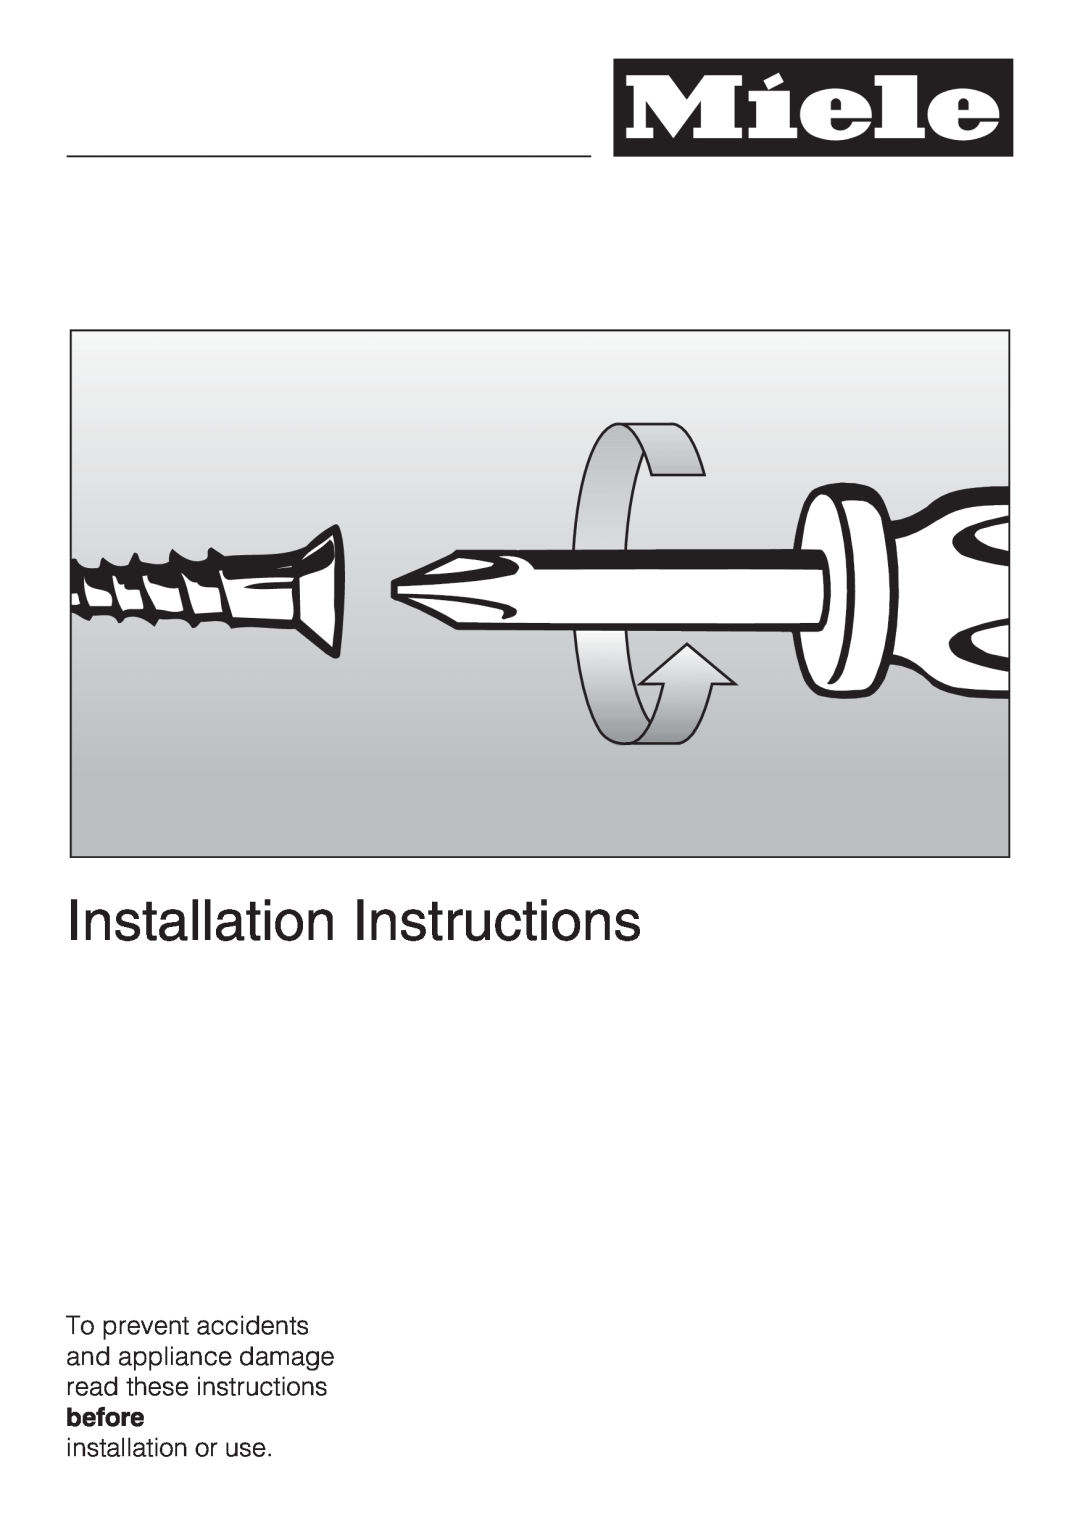 Miele ESS 2062 installation instructions Installation Instructions, installation or use 